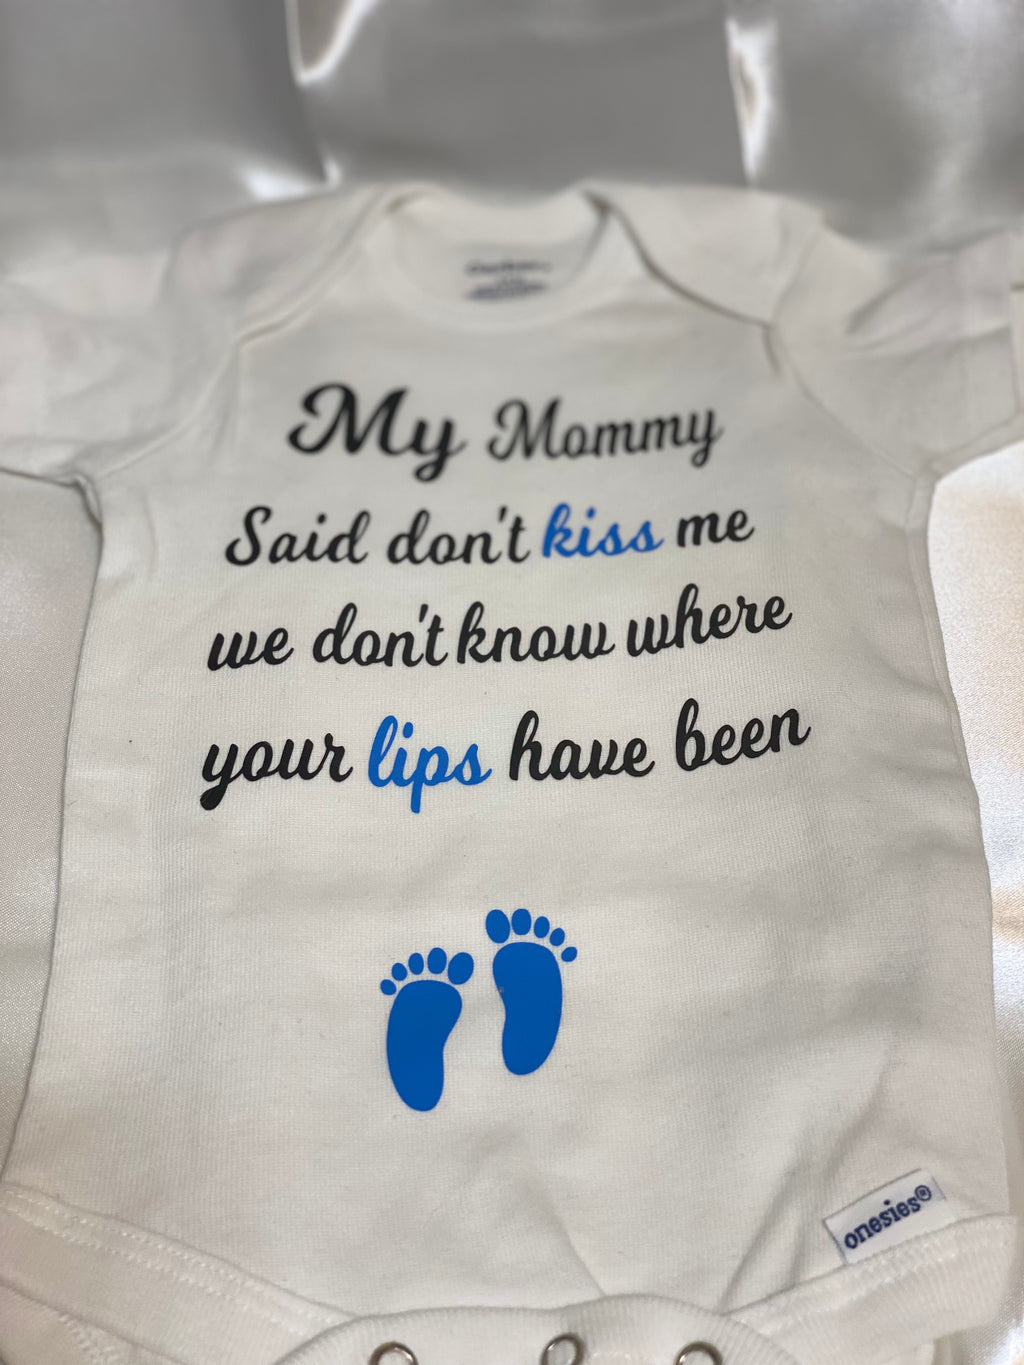 My Mommy said dont kiss me Onesie